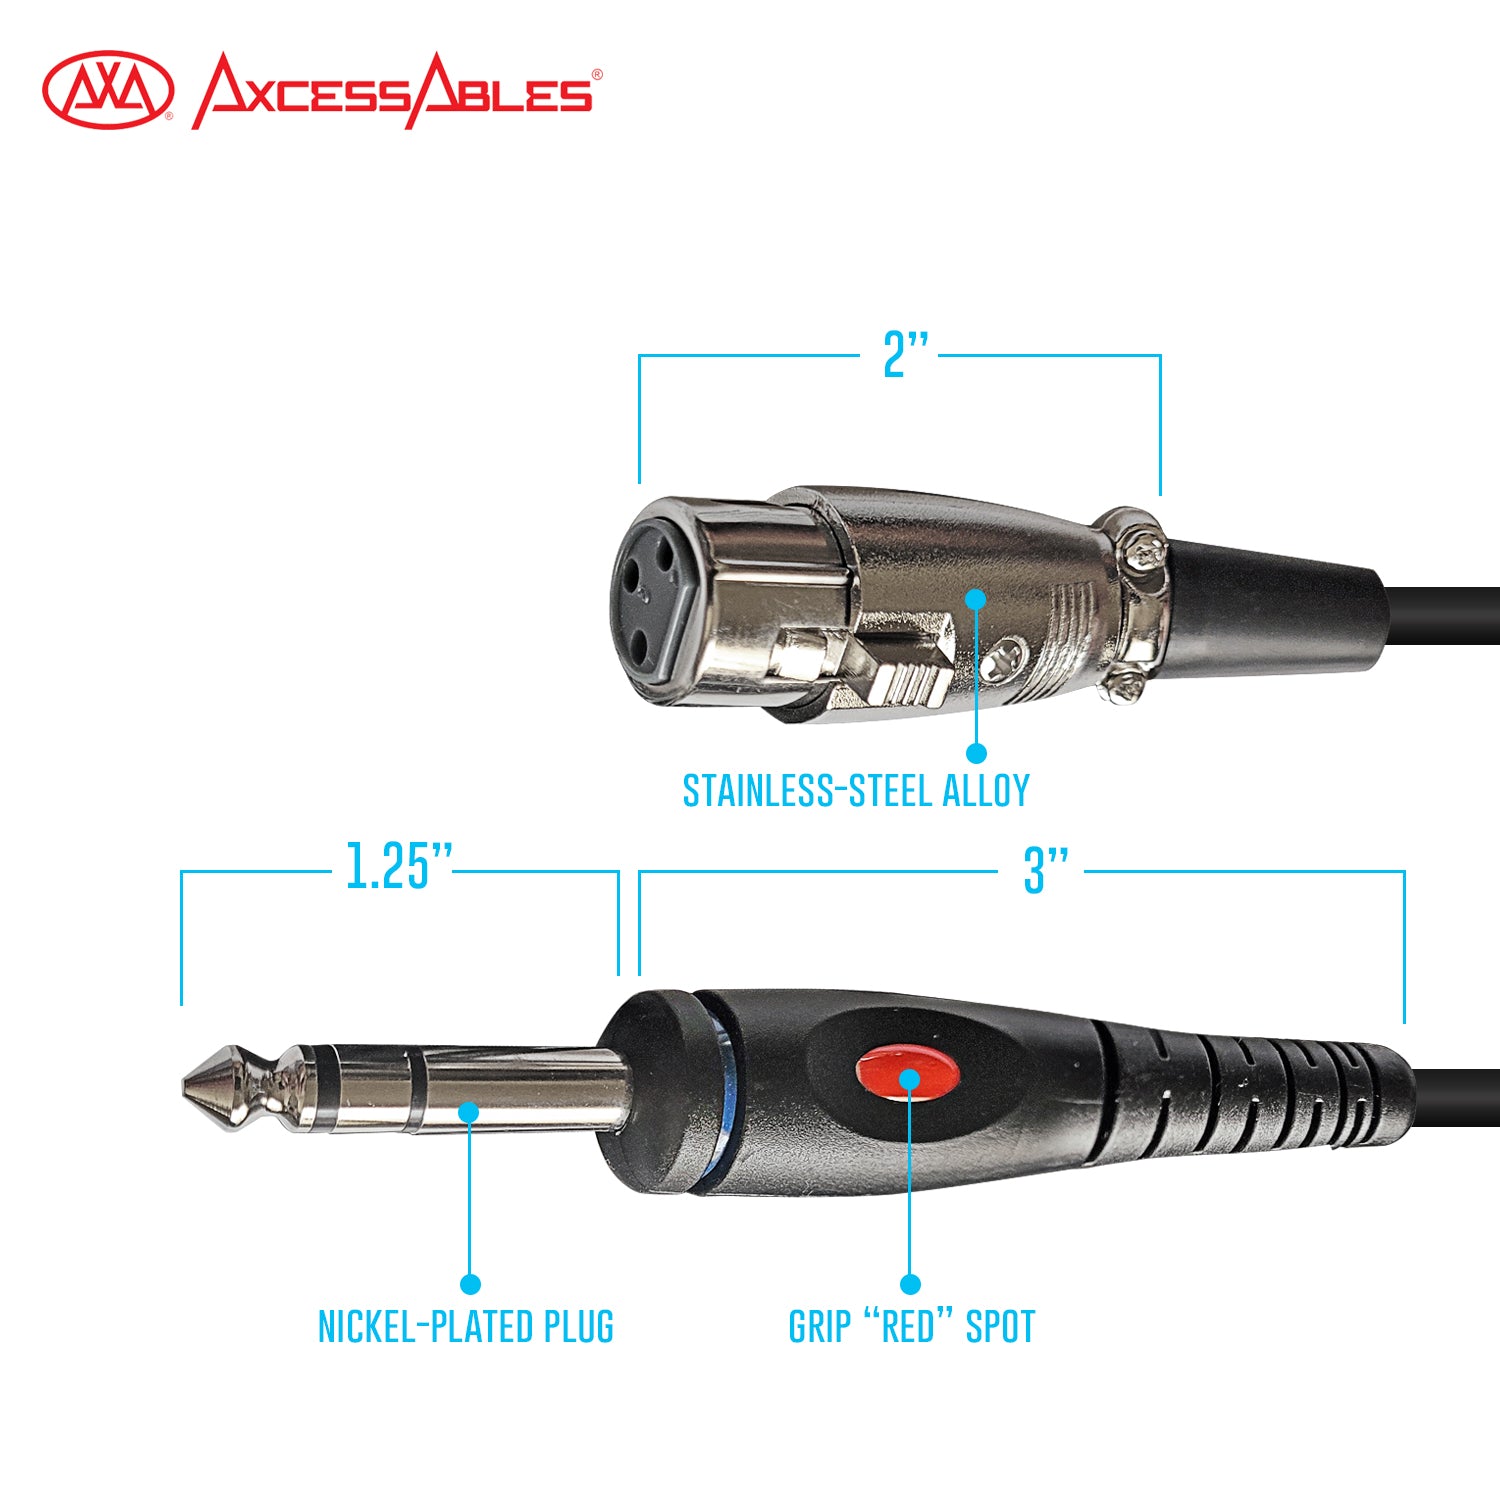 AxcessAbles XLR to 1/4 Inch TRS Instrument Cable 10ft | XLR Female to 6.35mm Male Jack Stereo Audio Cord | 10ft XLR to TRS Balanced Patch Cables